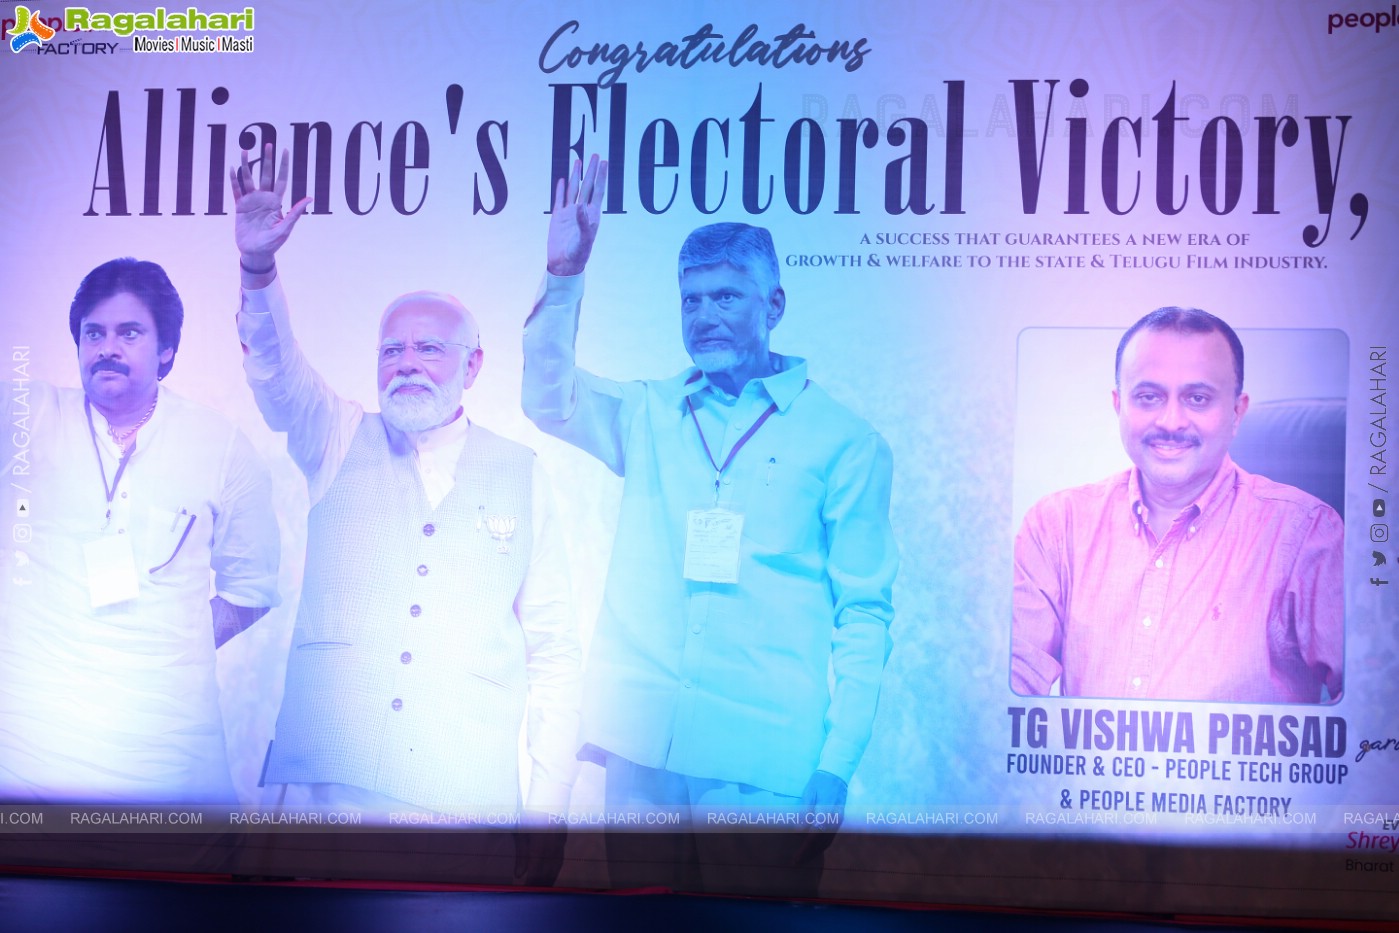 People Media Factory's Grand Celebrations of the Alliance's Electoral Victory